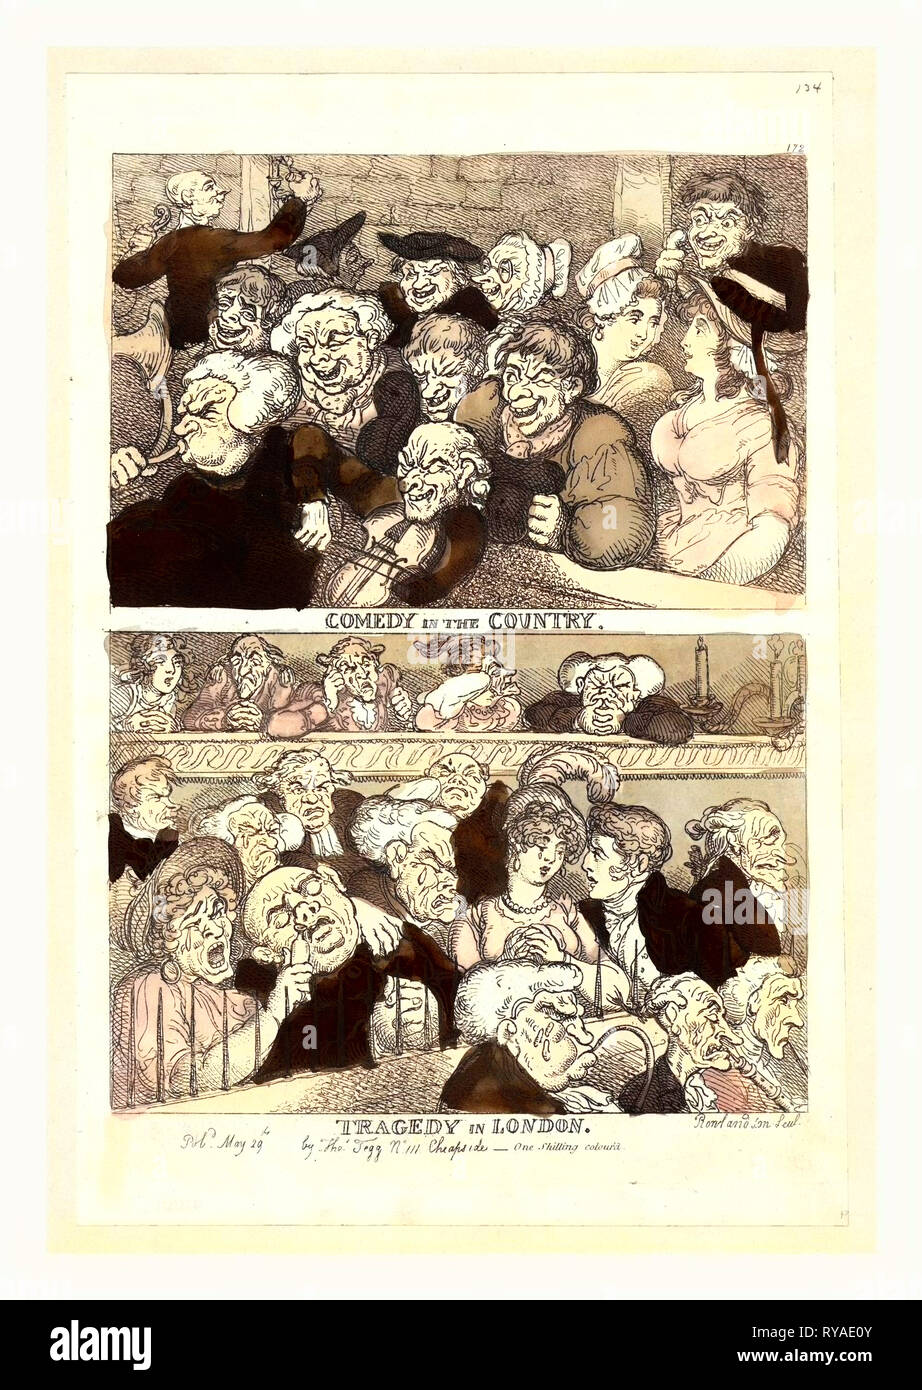 Comedy in the Country. Tragedy in London, Rowlandson, Thomas, 1756-1827, Engraving 1807, Two Designs on One Plate. Above, Two  Rows of Burlesqued Yokels (with Two Comely Women, and an Ugly Old One), Seated behind the Orchestra and Backed by a Rough Brick Wall, below, Three Members of the Orchestra Play, Grotesquely Weeping Stock Photo